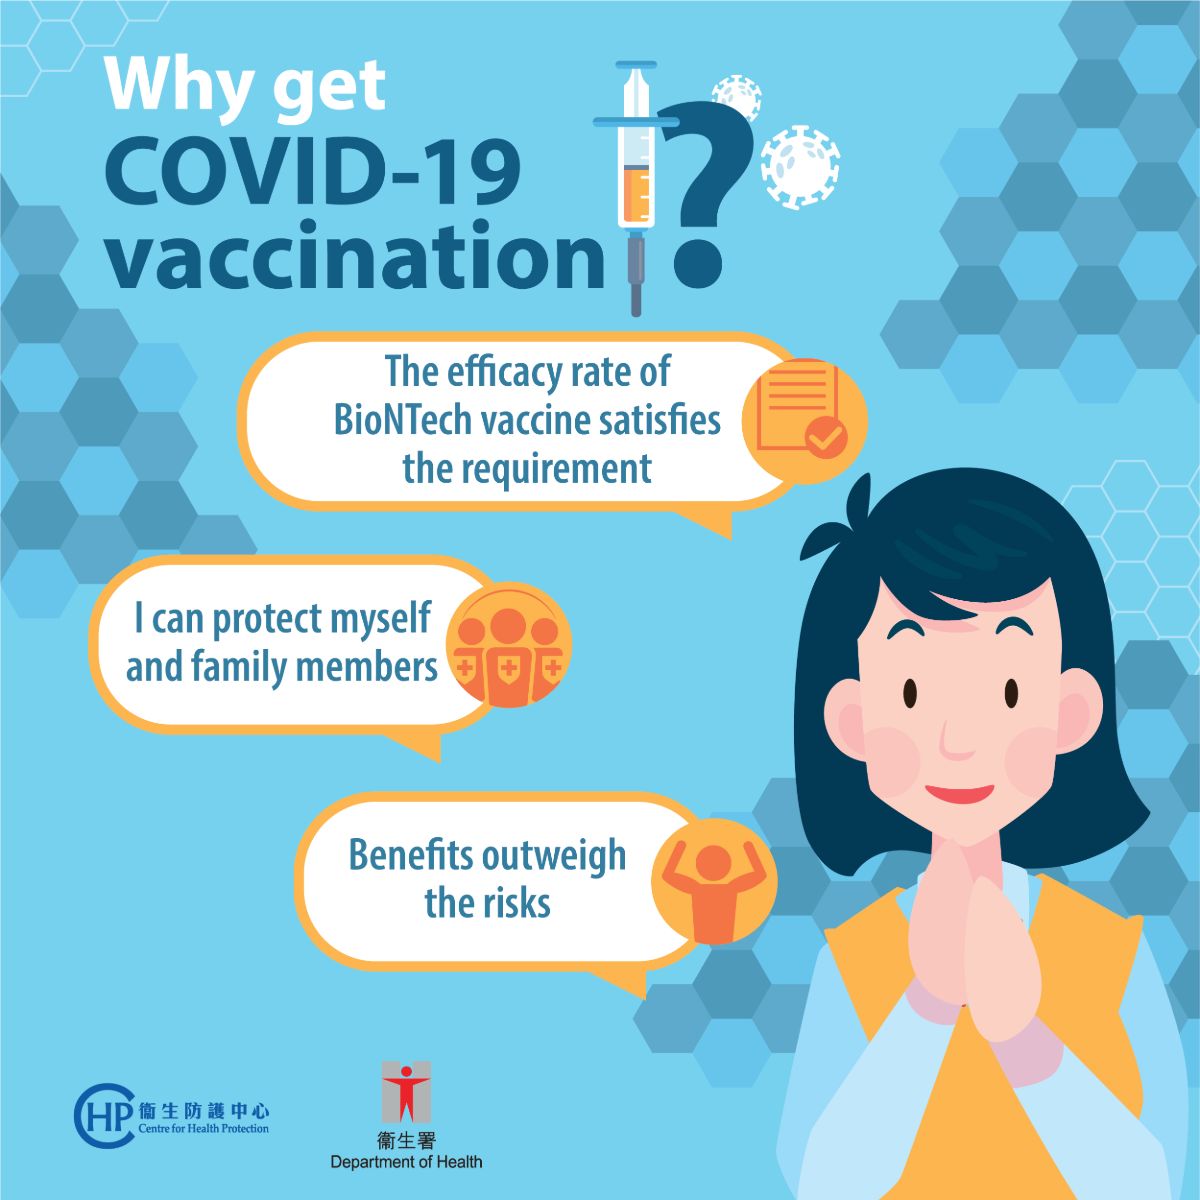 "Why We Should Get COVID-19 Vaccination" Series: Benefits outweigh the risks